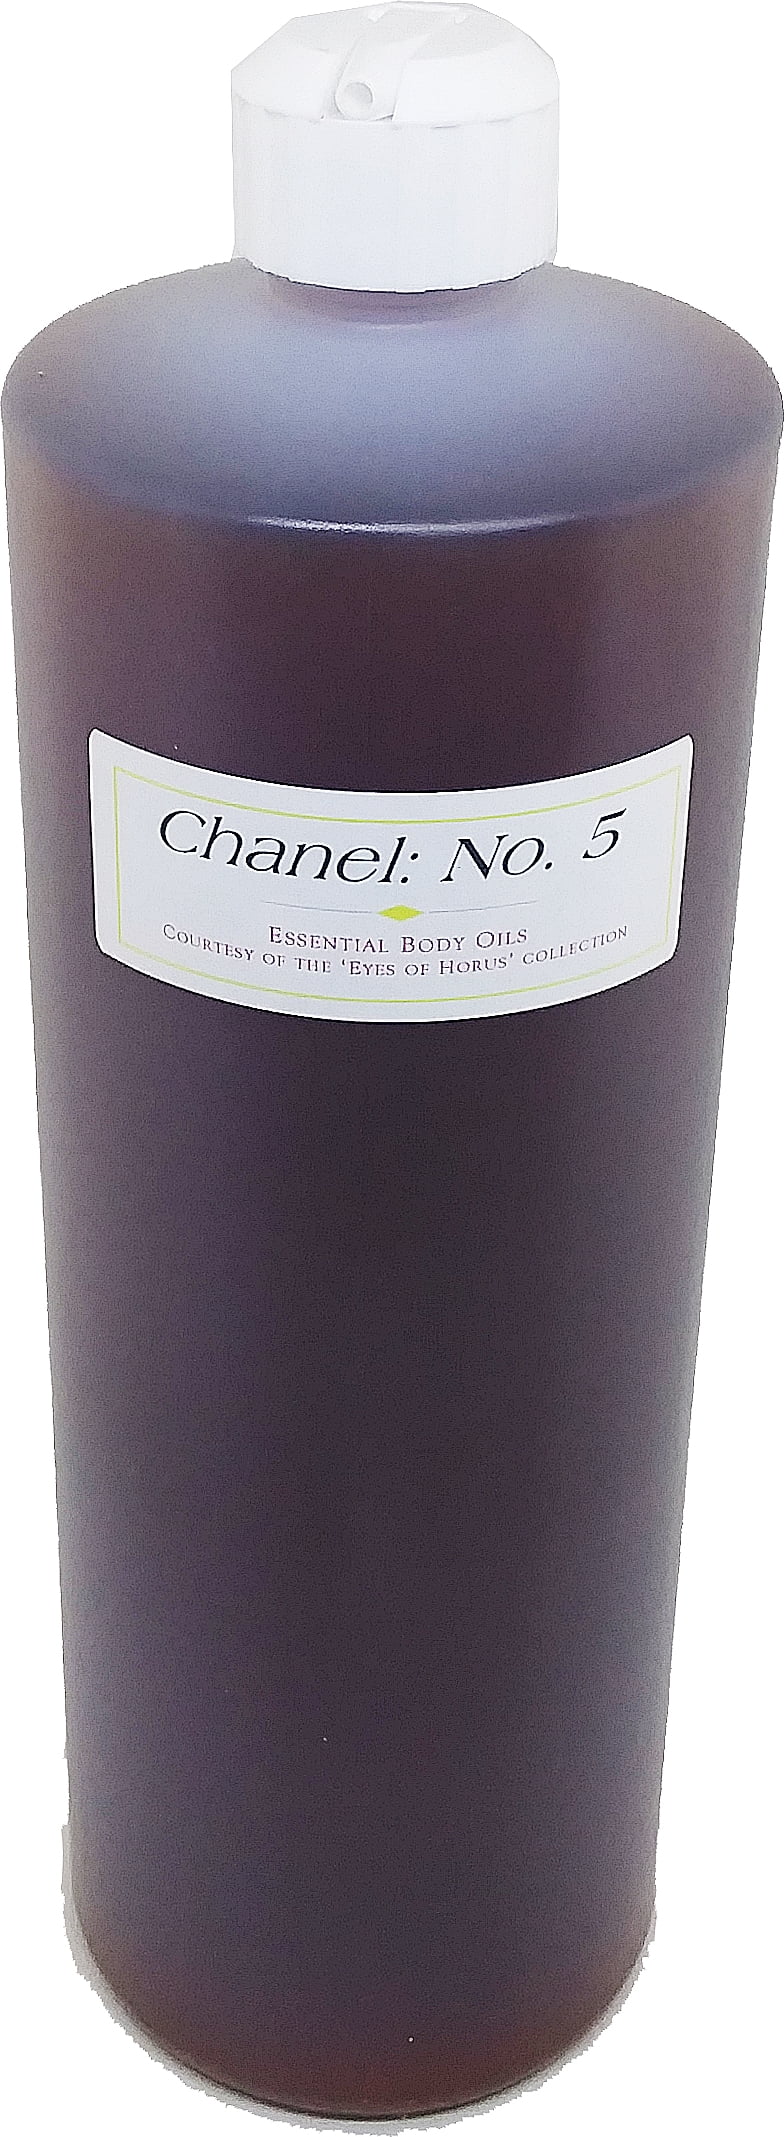 Chanel: No. 5 - Type Scented Body Oil Fragrance [Flip Cap - HDPE Plastic -  Brown - 2 lbs.]